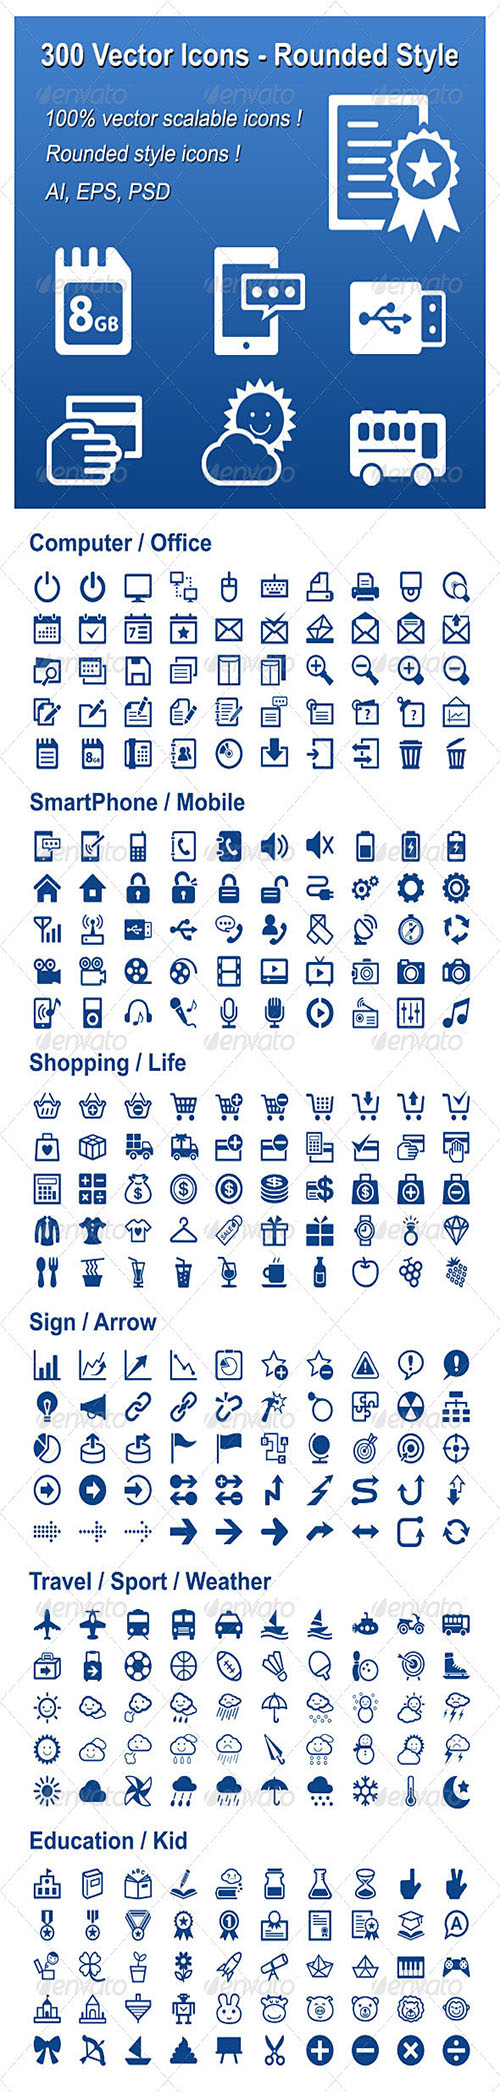 GraphicRiver - 300 Vector Icons - Rounded Style